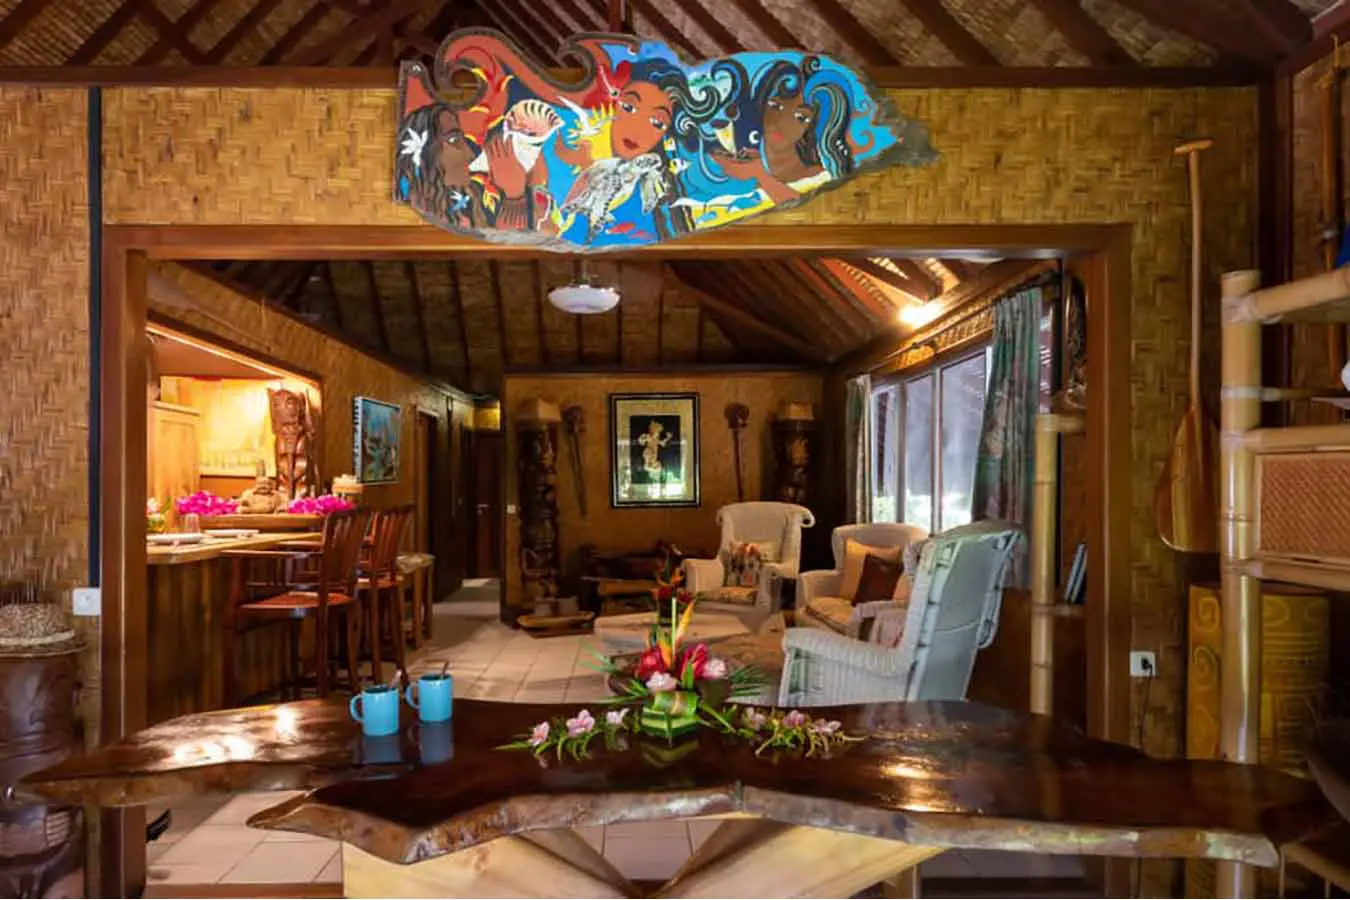 Polynesian living room with vintage sofa and sculptures in the Bora Bora vacation home